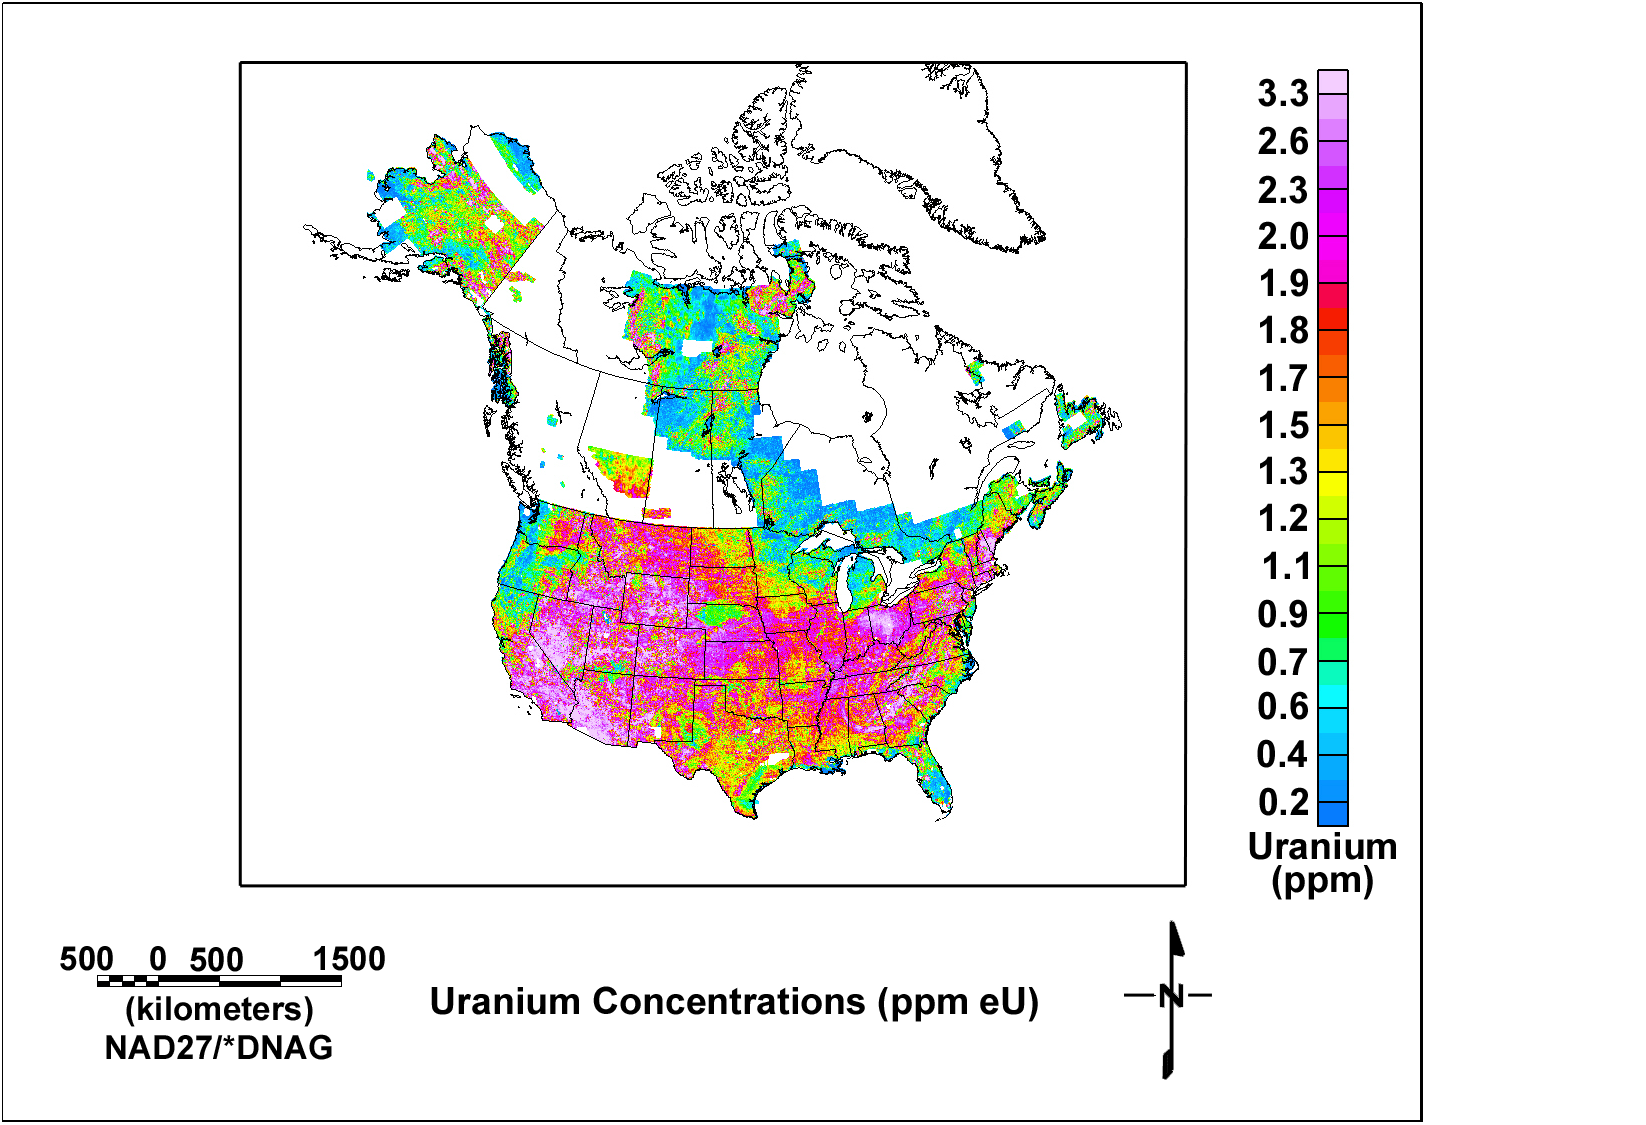 Image of map showing uranium concentrations.